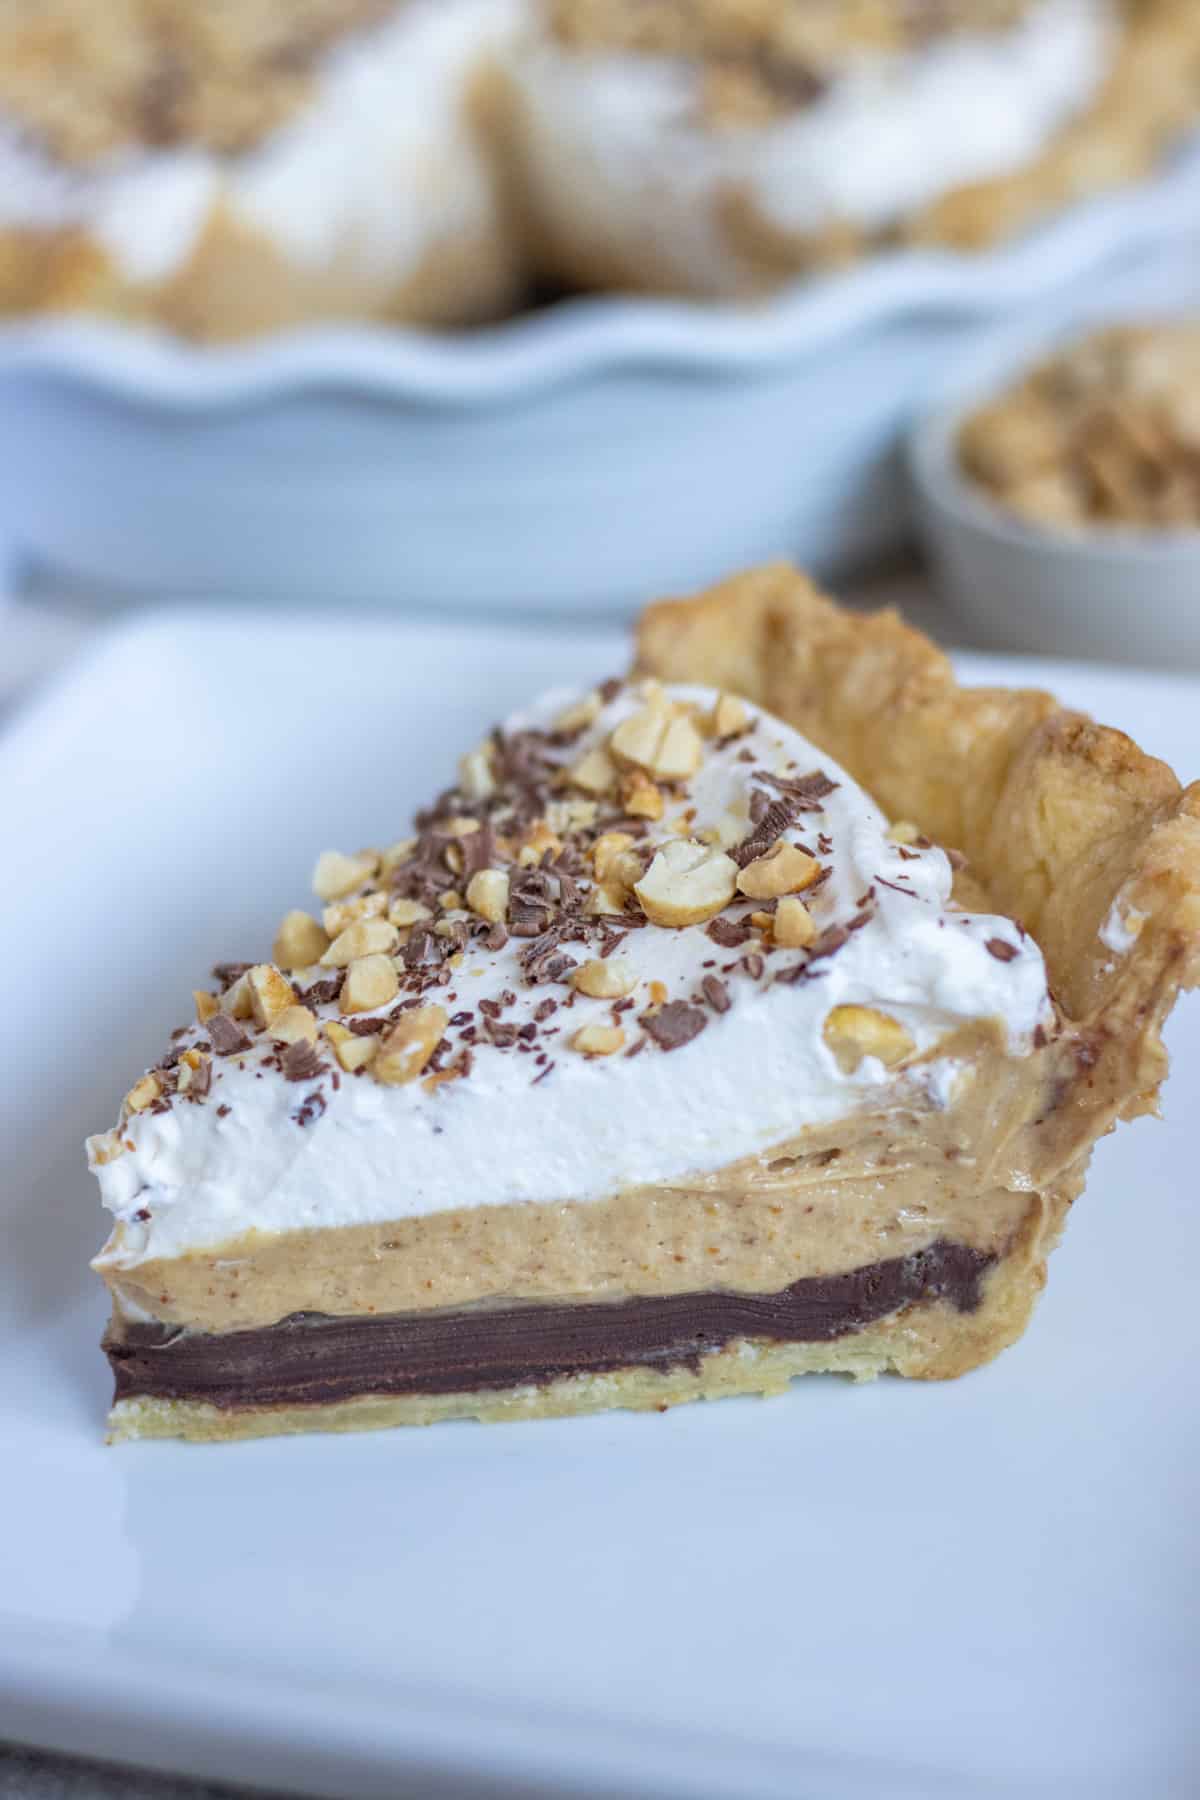 Side shot of a slice of pie with a chocolate layer, a peanut butter layer, and a whipped cream layer with chocolate shavings and chopped peanuts on top.